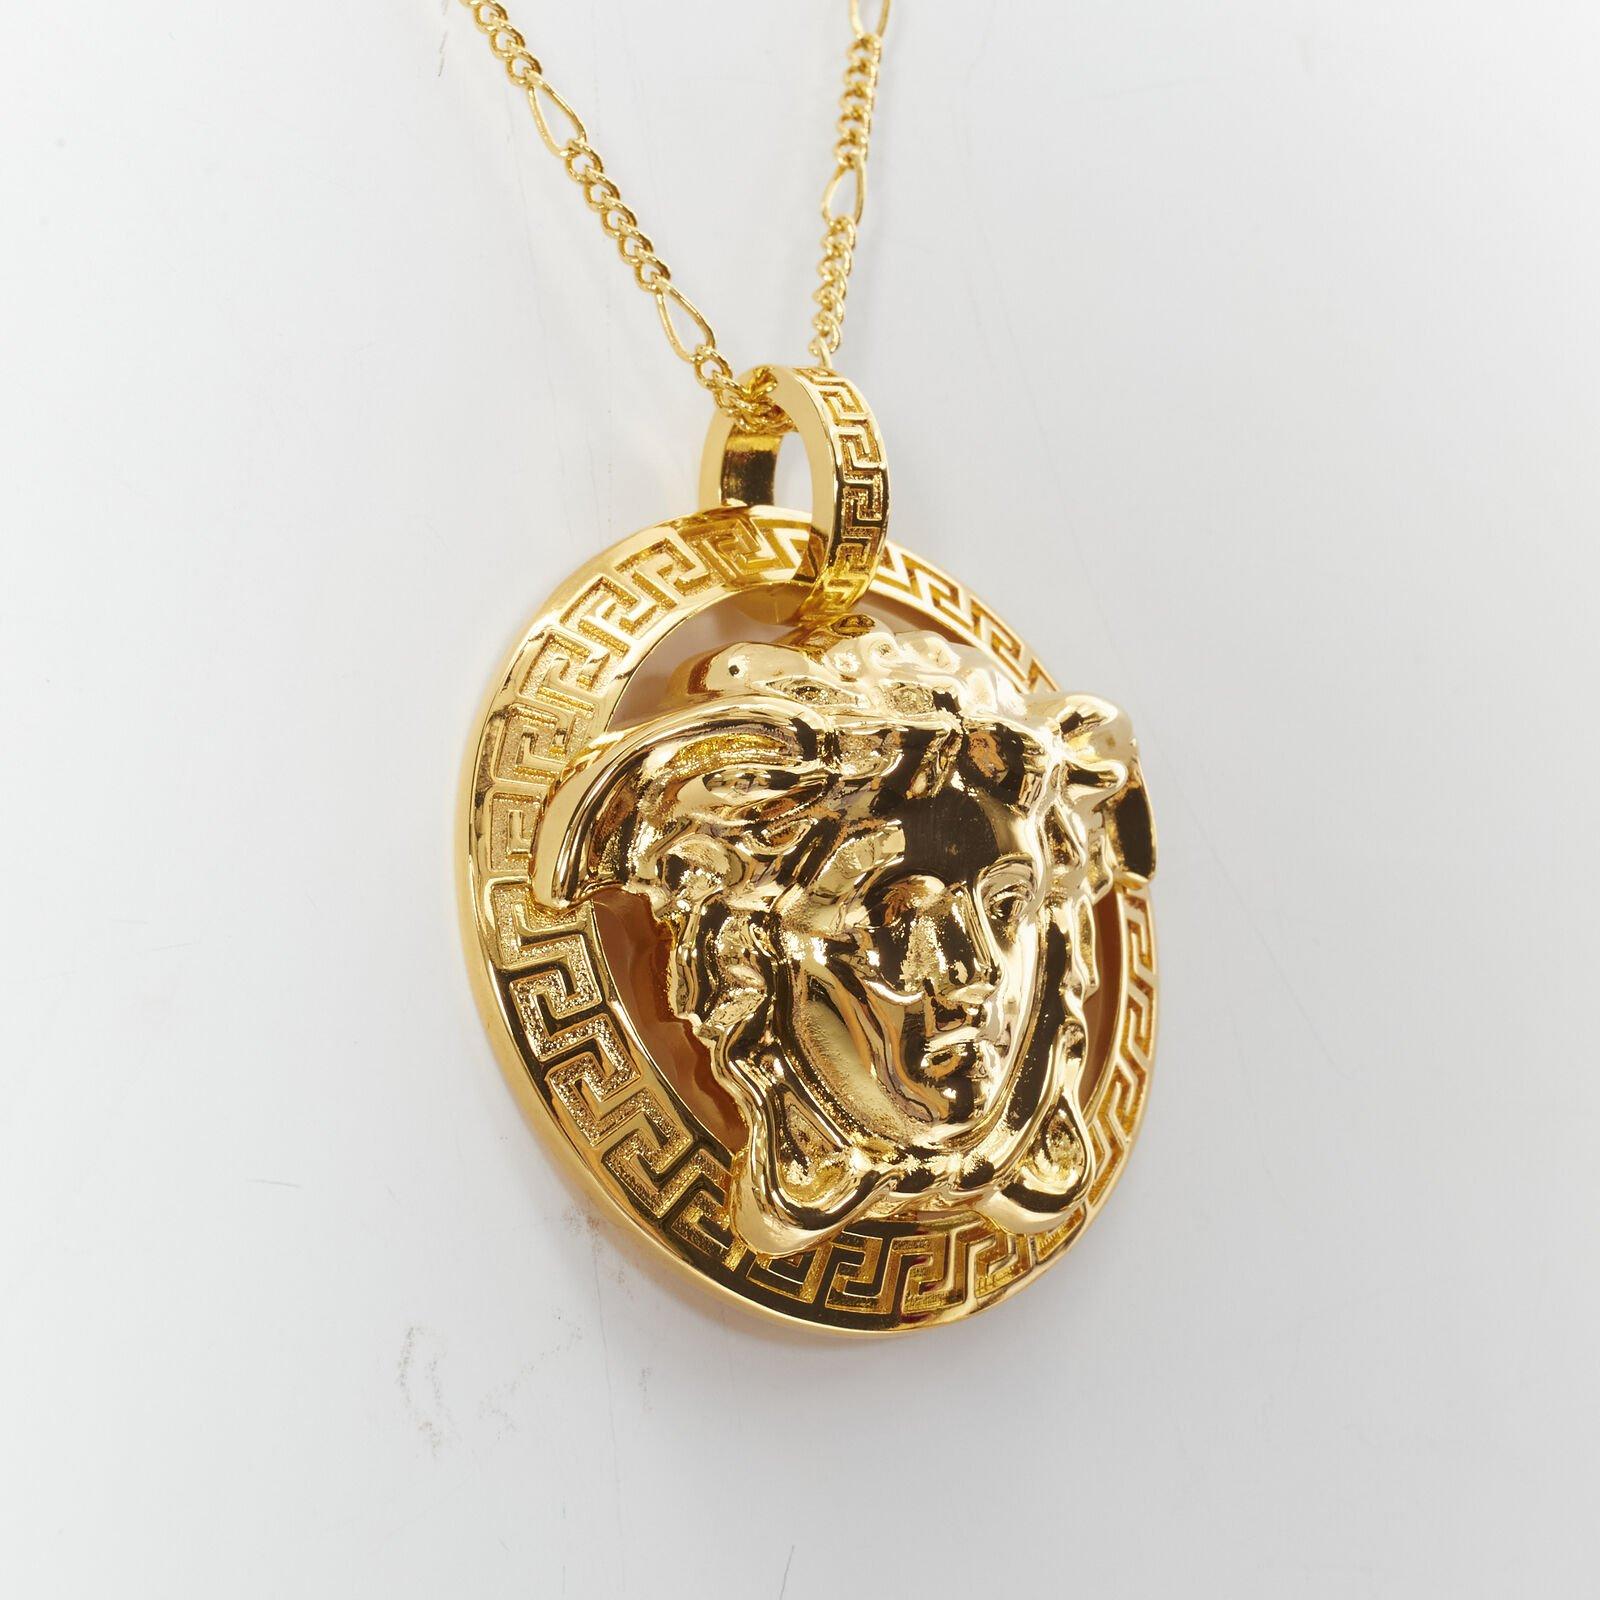 VERSACE Medusa Greca coin medallion gold tone nickel short necklace
Reference: TGAS/B01129
Brand: Versace
Designer: Donatella Versace
Material: Nickel
Color: Gold
Pattern: Solid
Closure: Clasp
Extra Details: Oversized 3D Medusa head with Greca